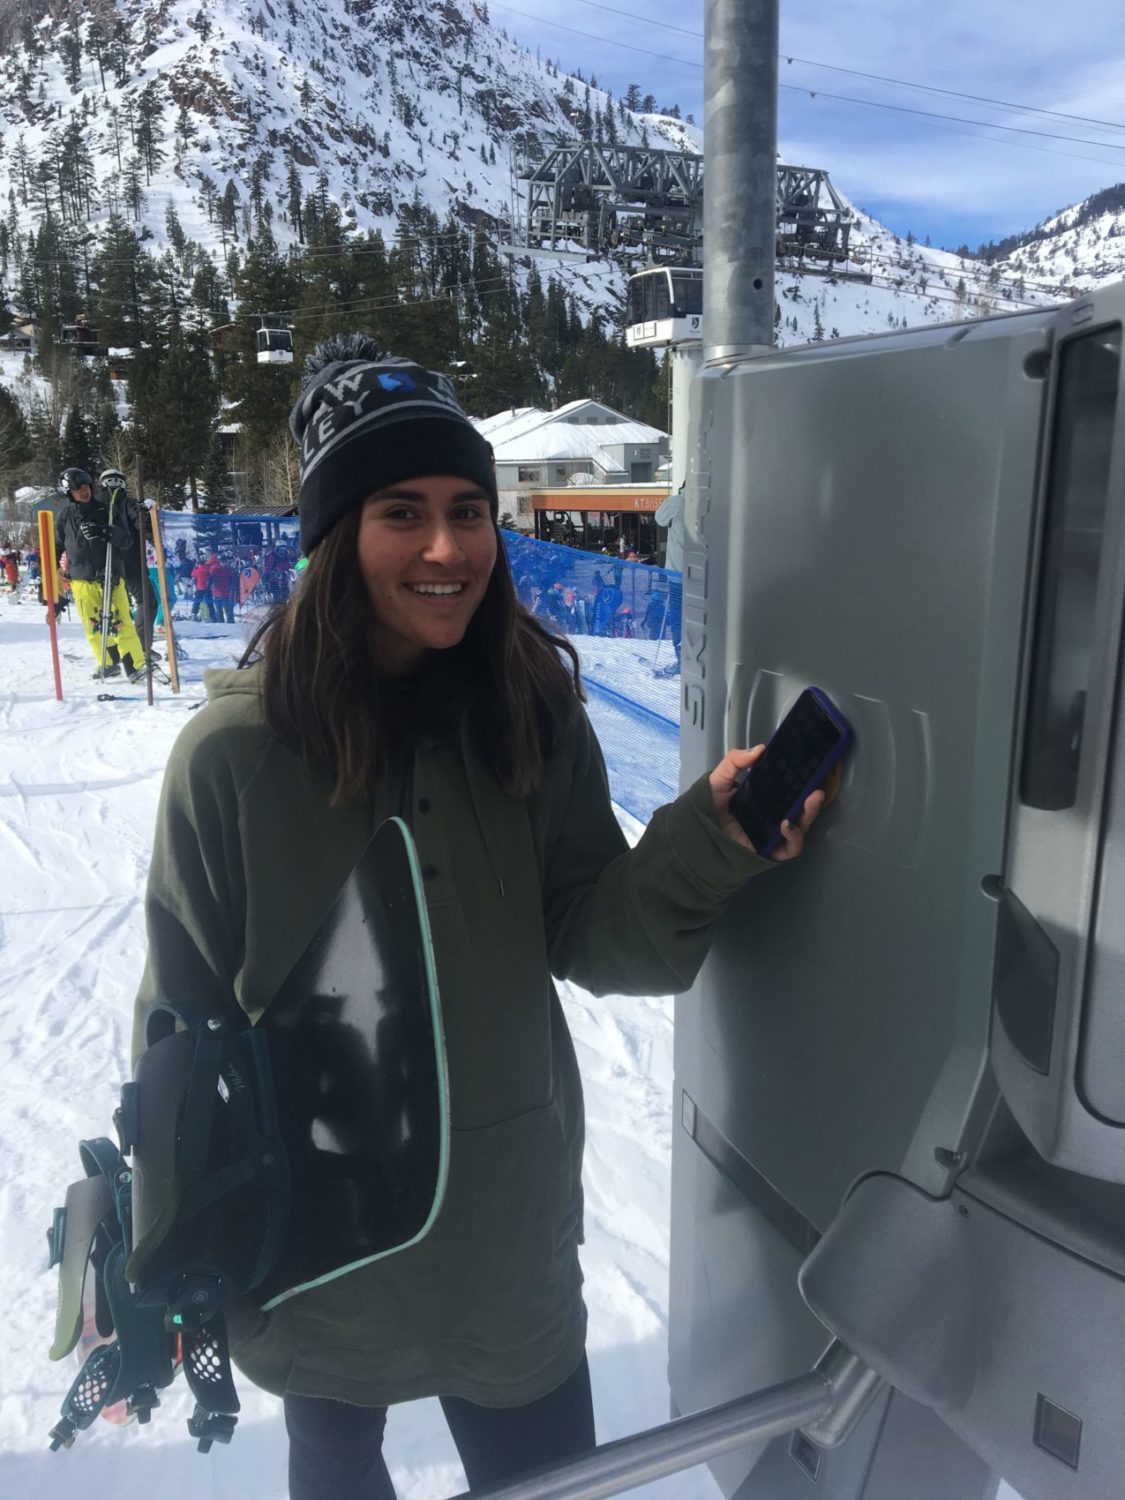 Vail Resorts, Ticket Checking, Mobile Ticket Checking, Checking tickets with mobile, cellphone, gate activated with cell phone, cell phone rfid ski resort, ski resort cell phone tickets